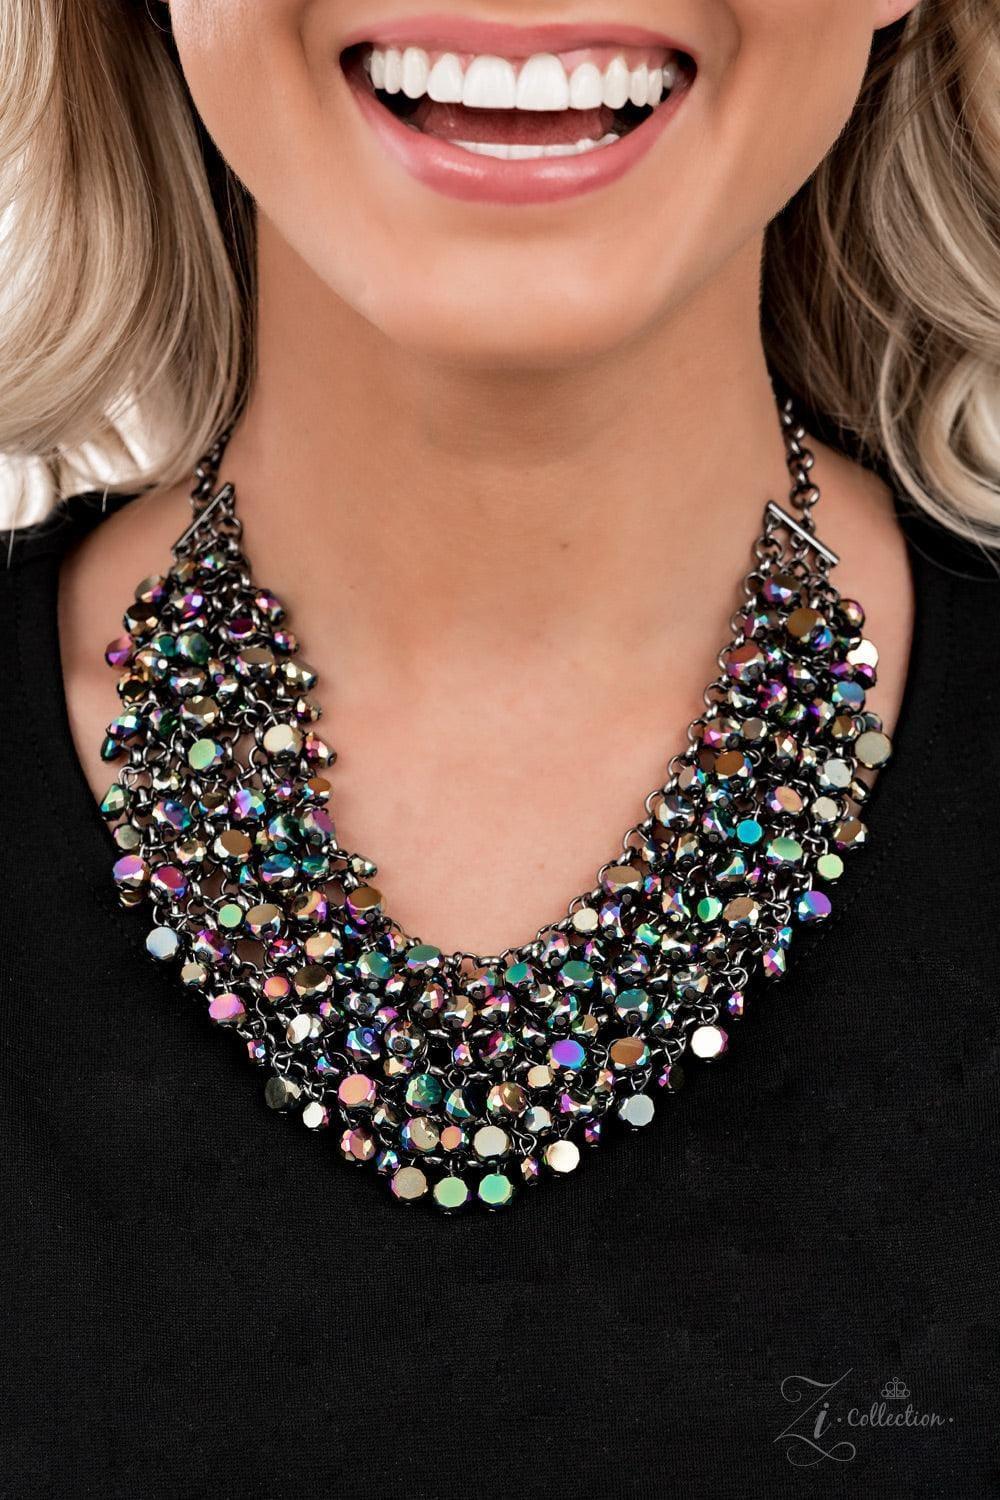 Paparazzi Accessories - Vivacious - 2021 Zi Collection Necklace - Bling by JessieK